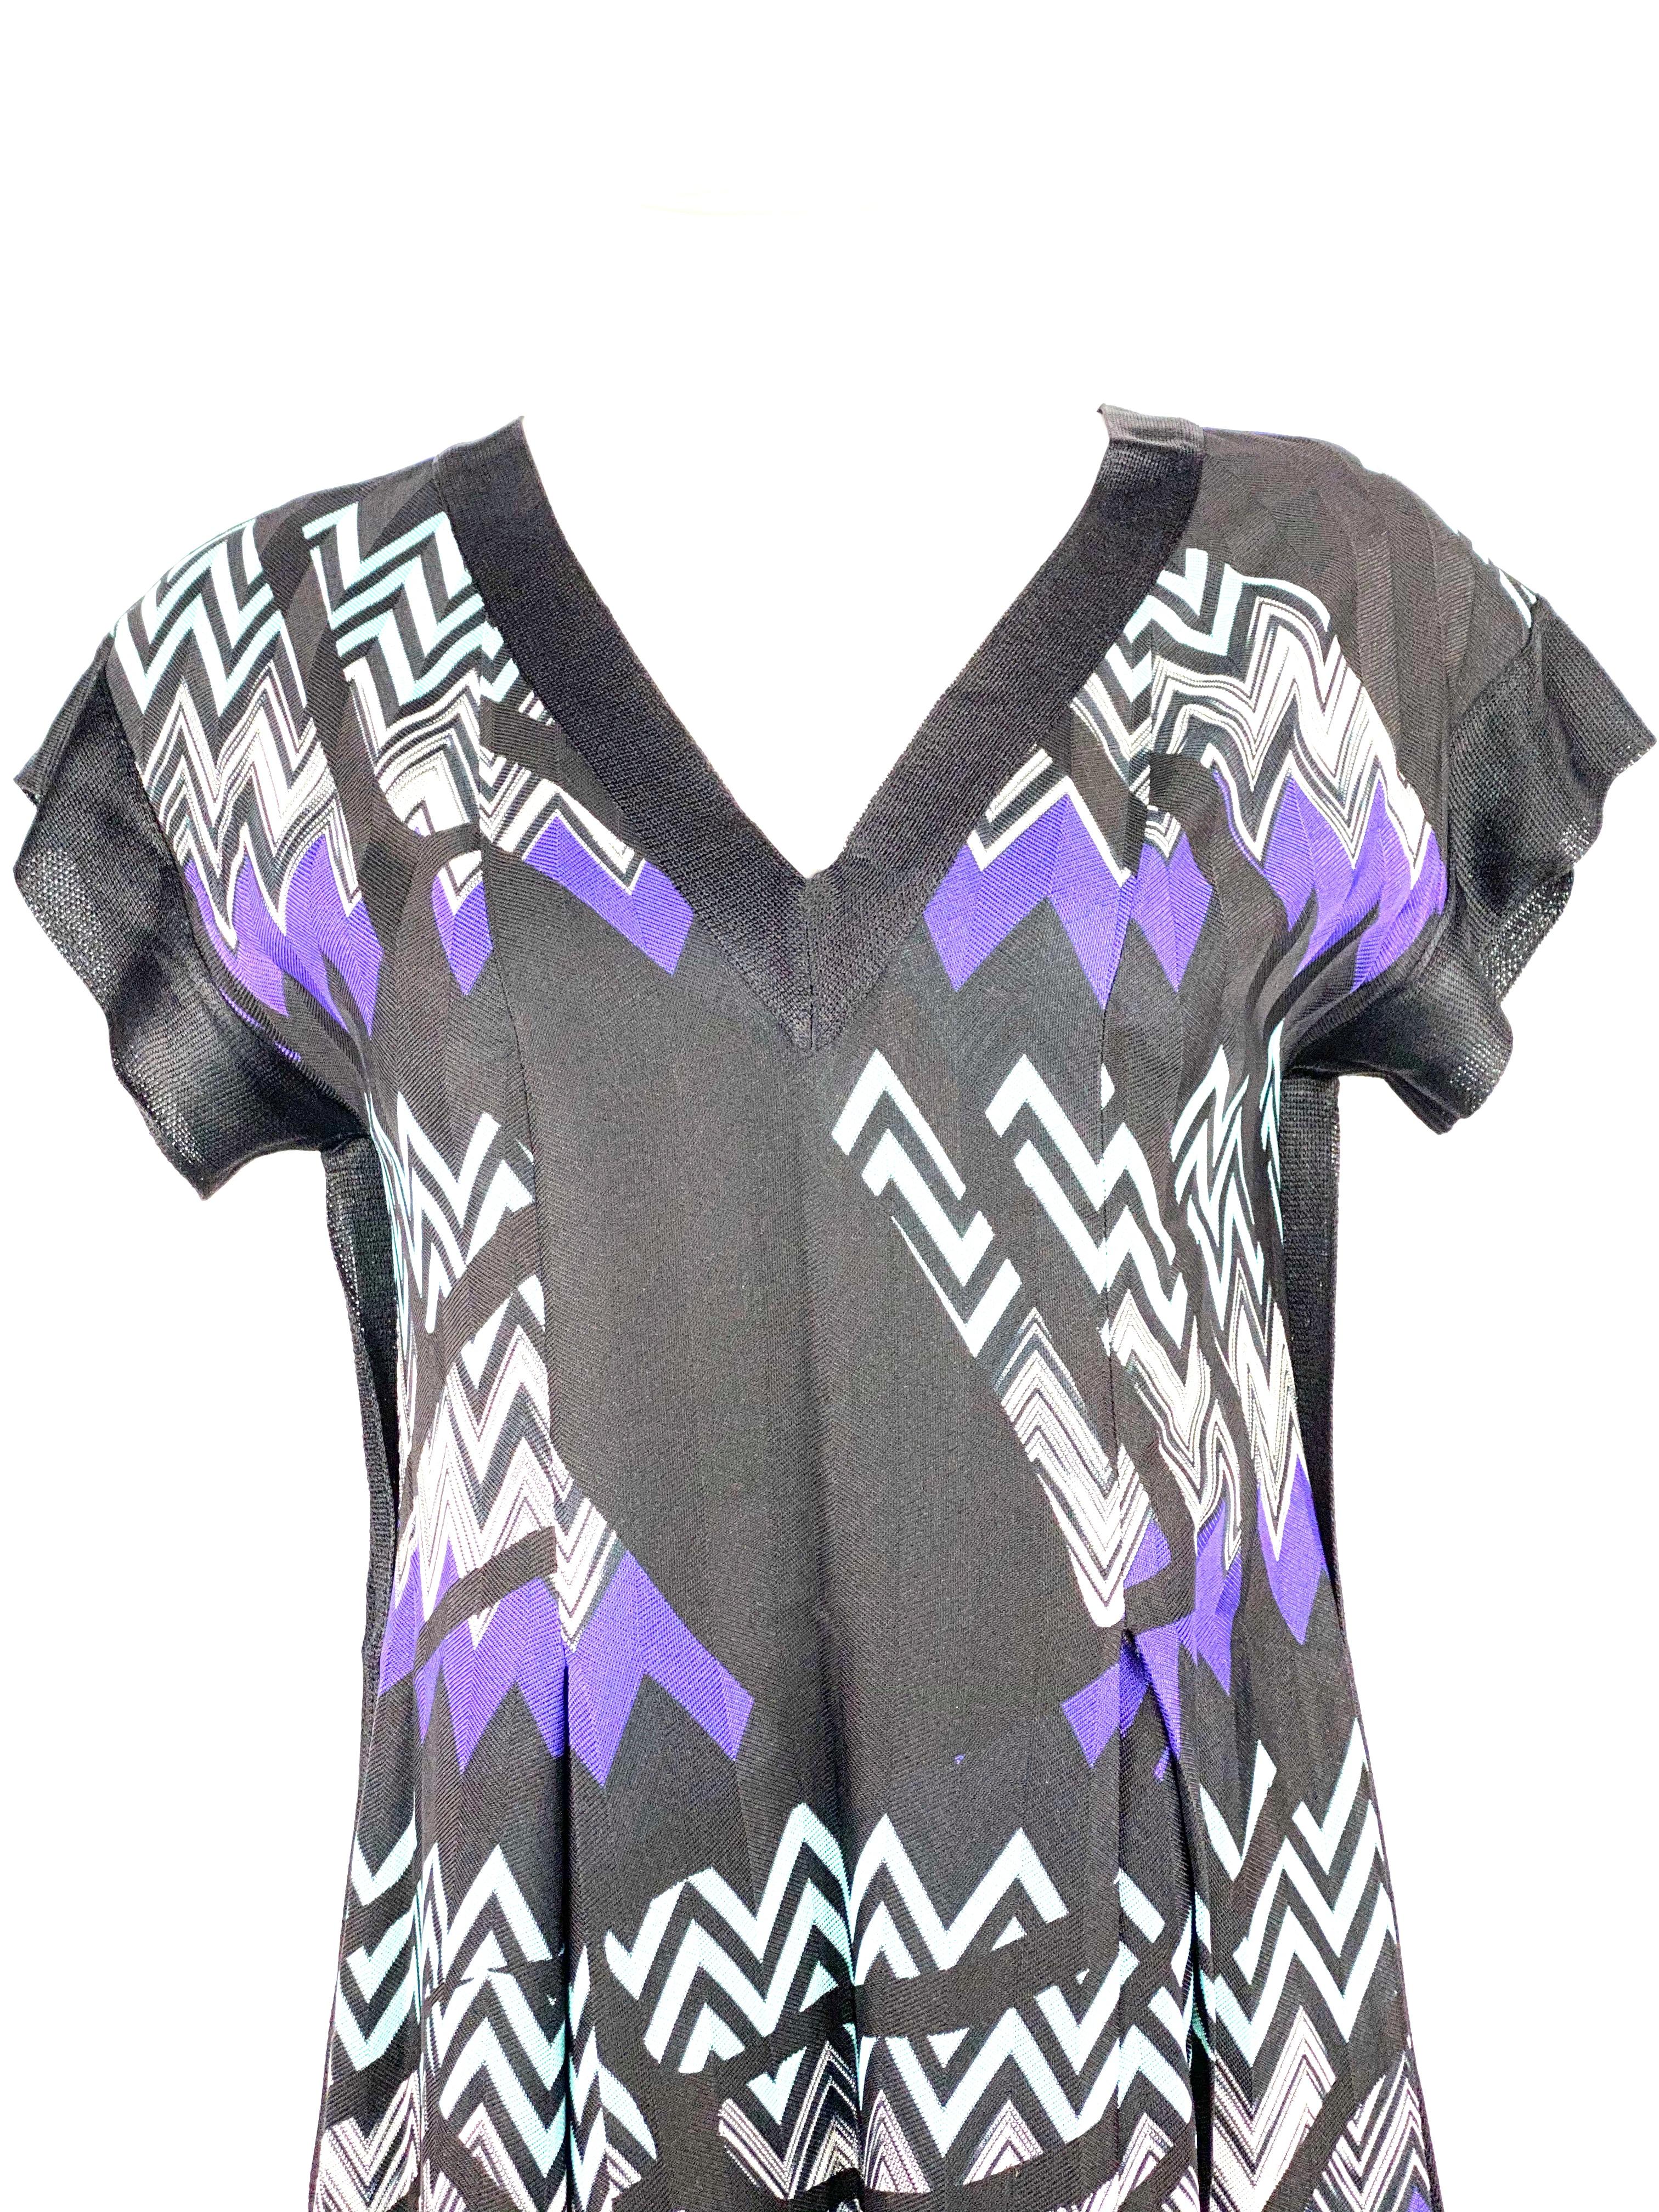 MISSONI Black and Blue Zig Zag Short Sleeves Mini Dress
Product detail:
100% Rayon
Black white and blue w/ zig zag pattern
Short sleeves
V neck cut out 
Made in Italy
